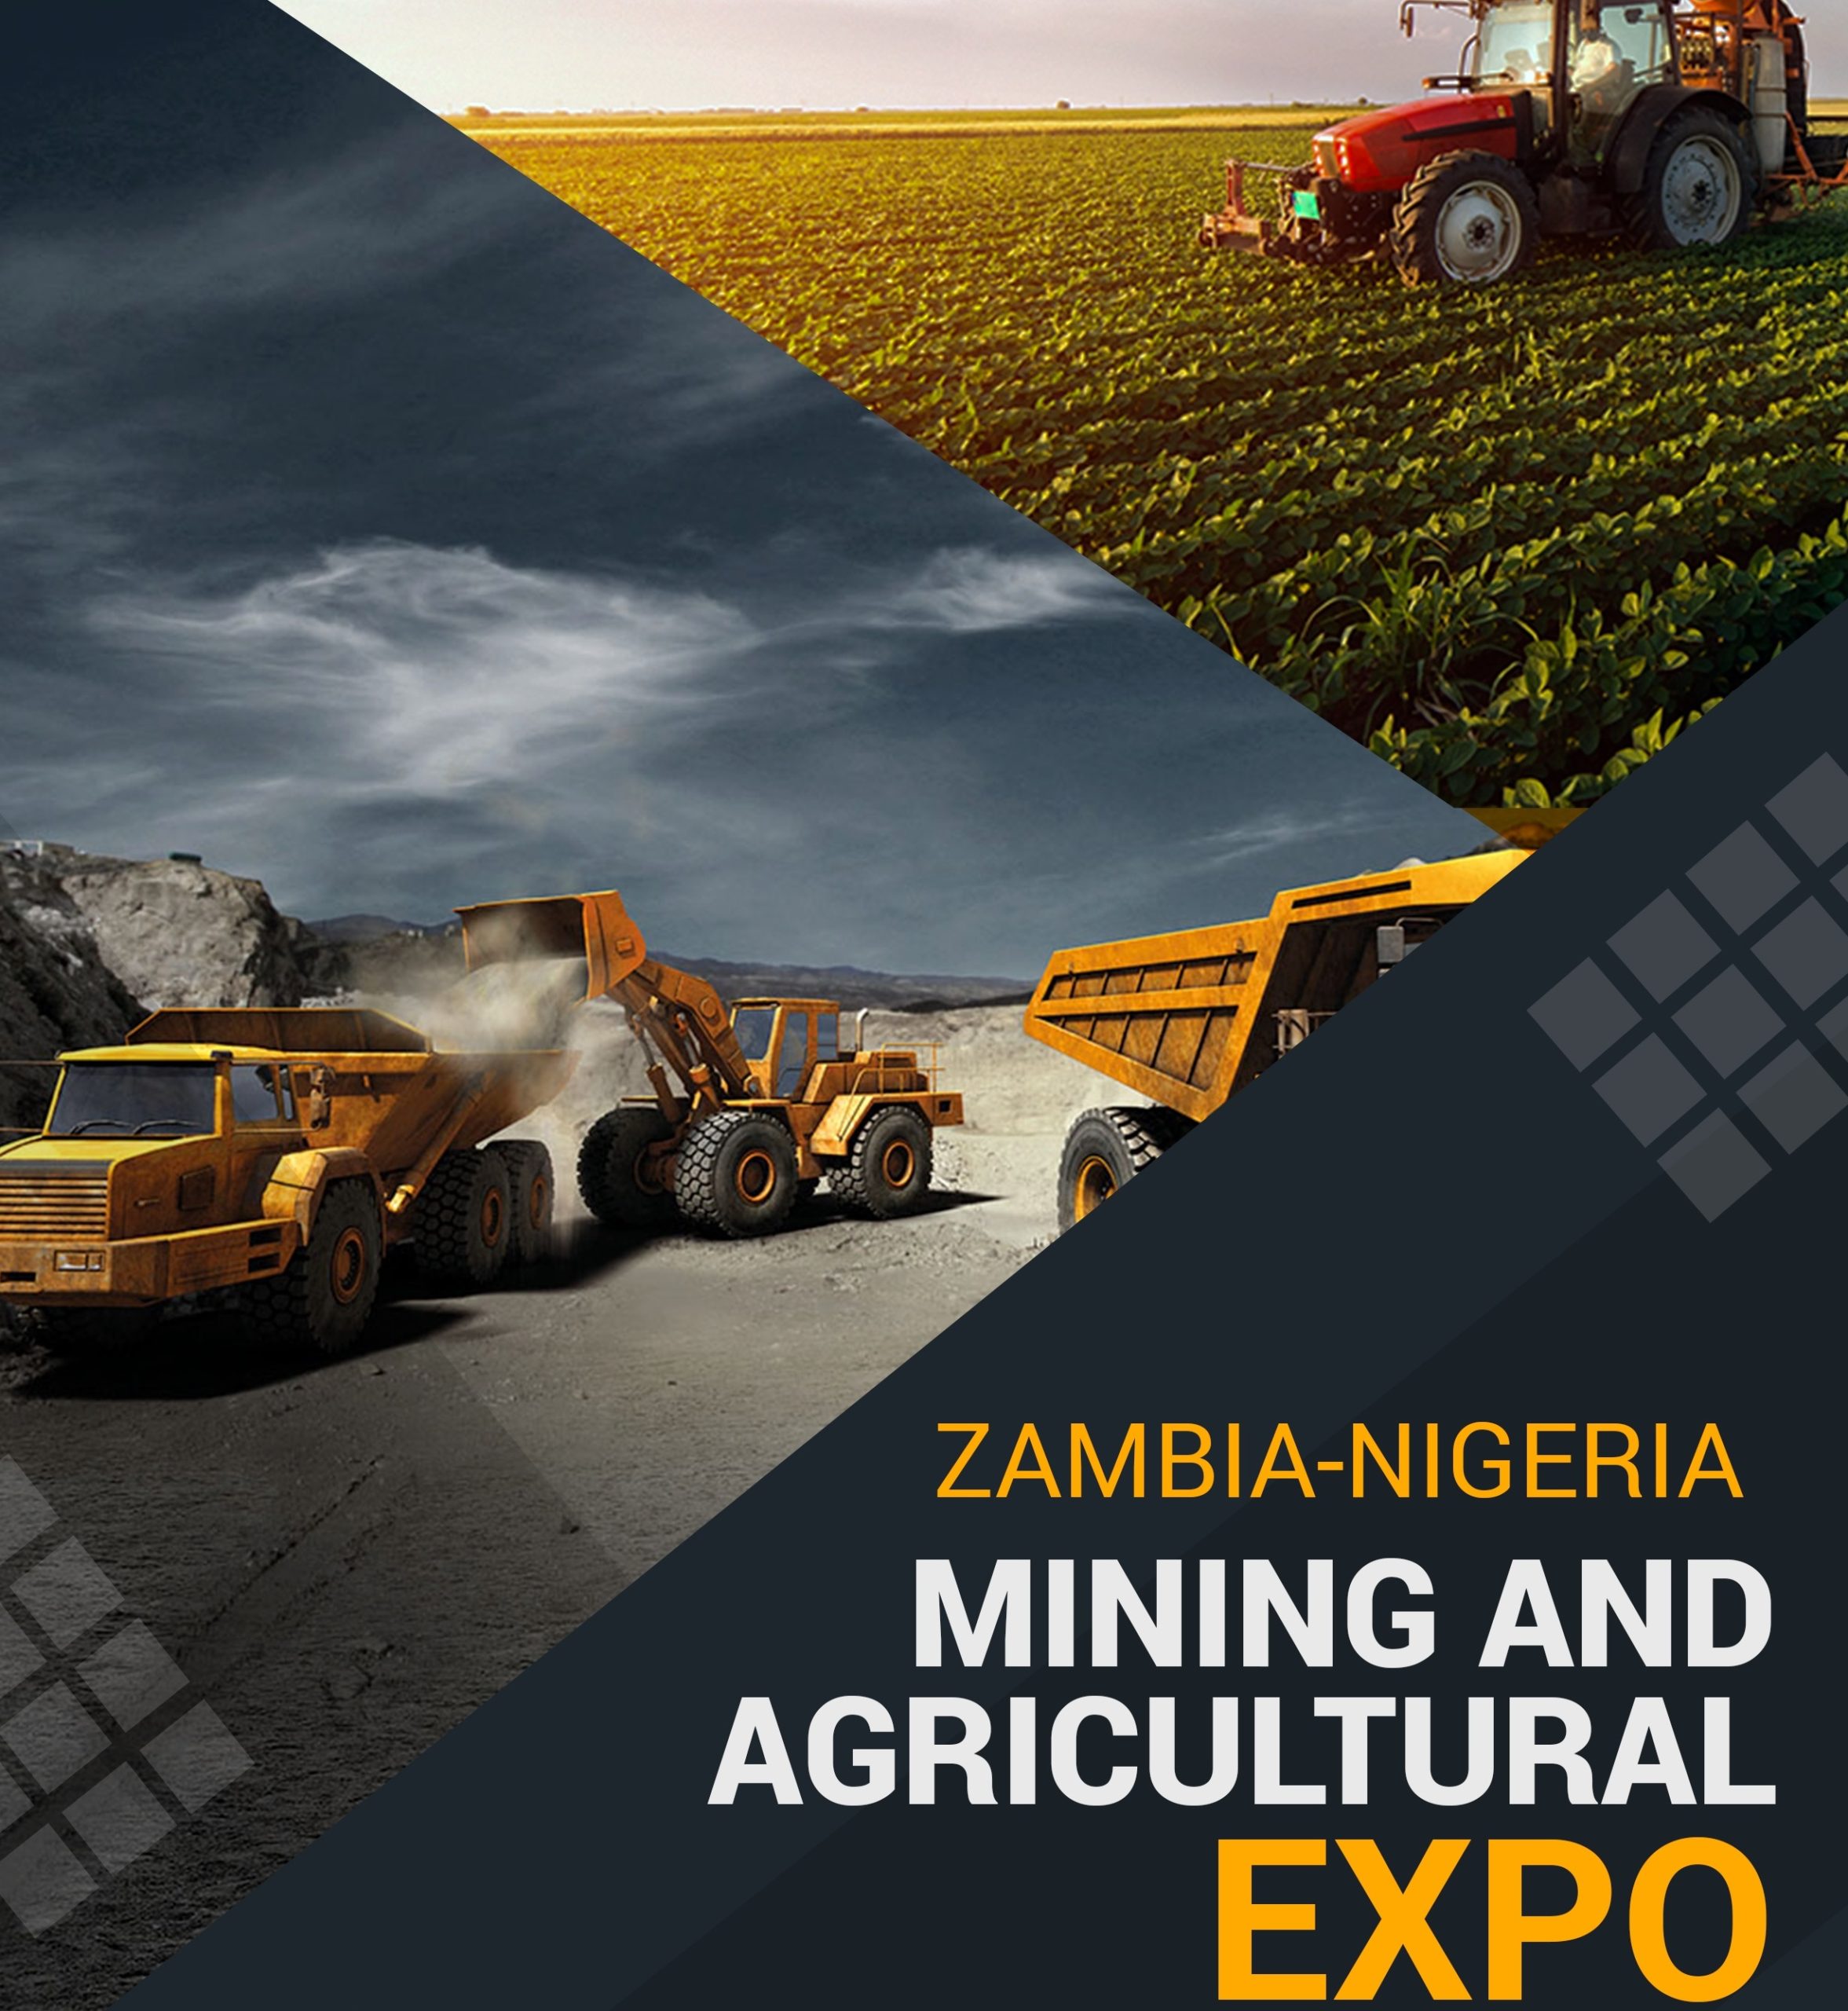 Zambia-Nigeria Mining and Agricultural Expo